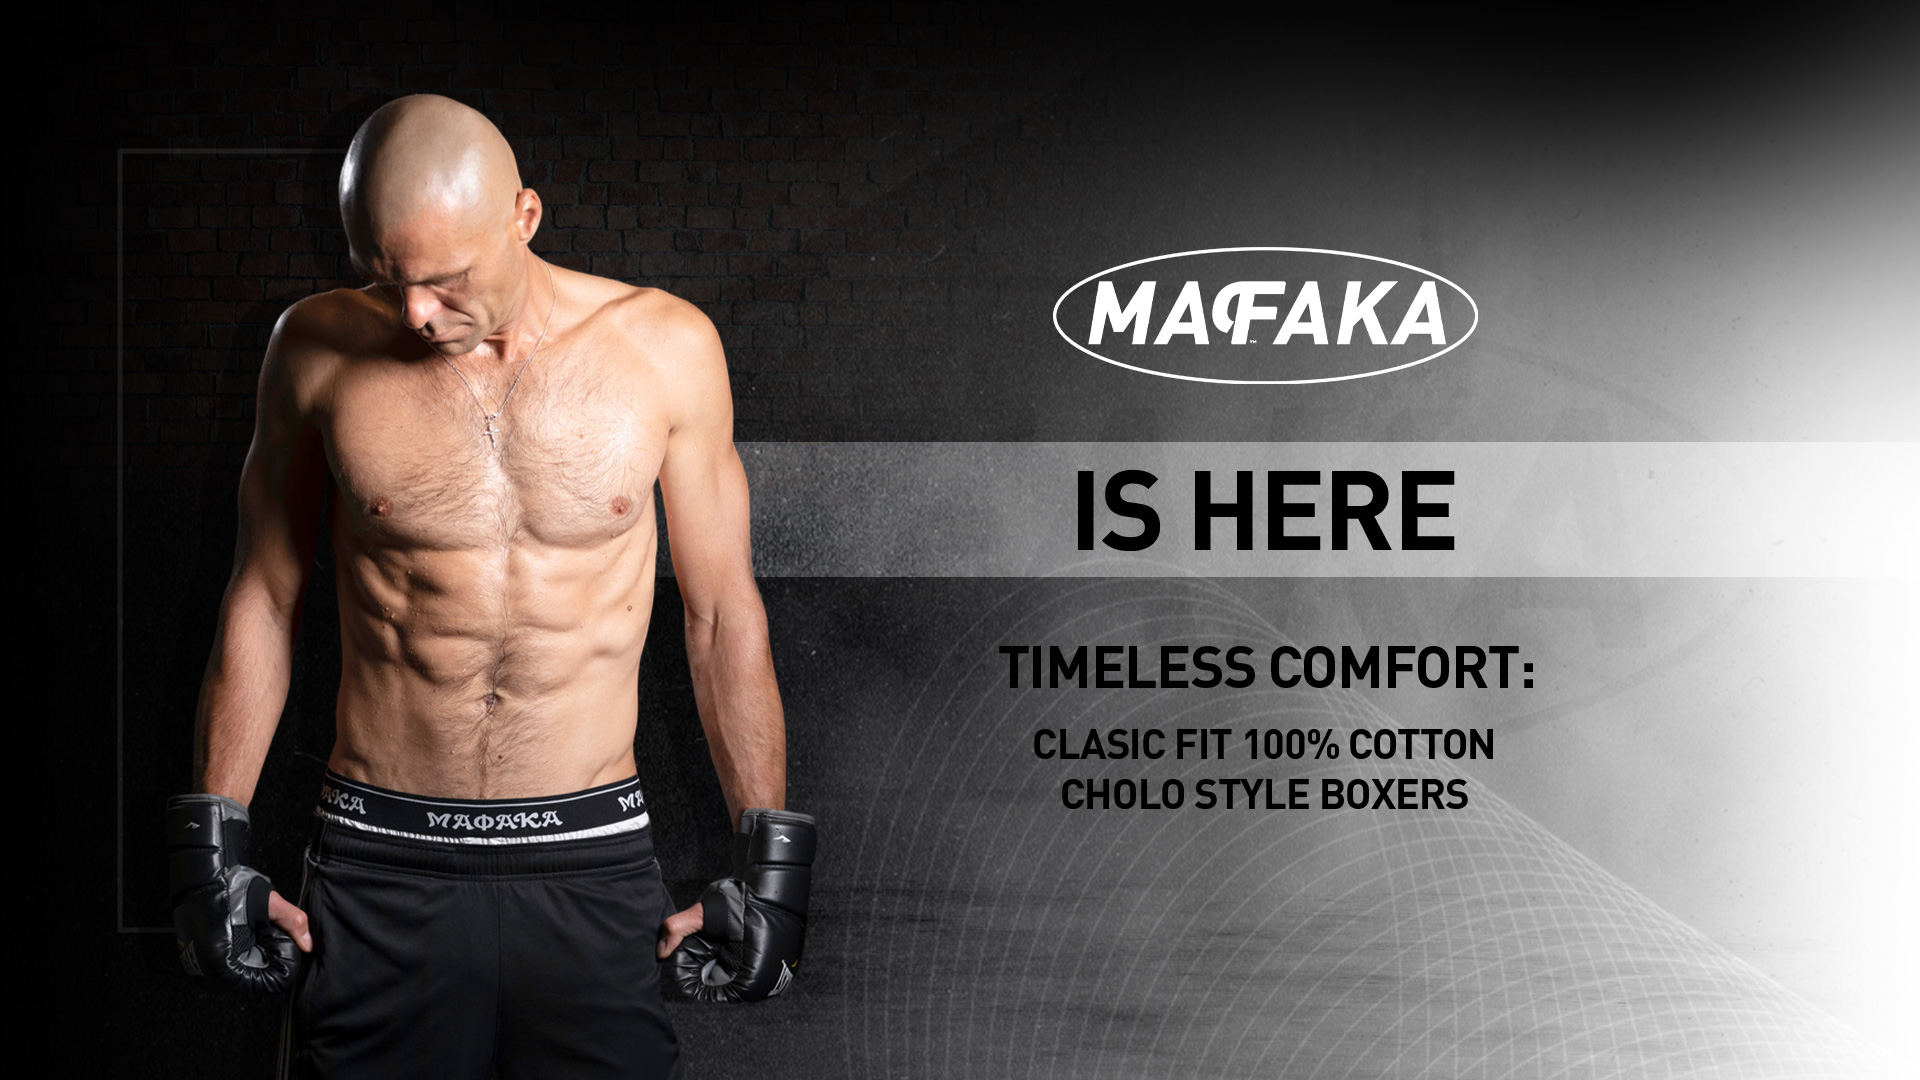 Mafaka Apparel's inaugural drop of boxers is available for sale